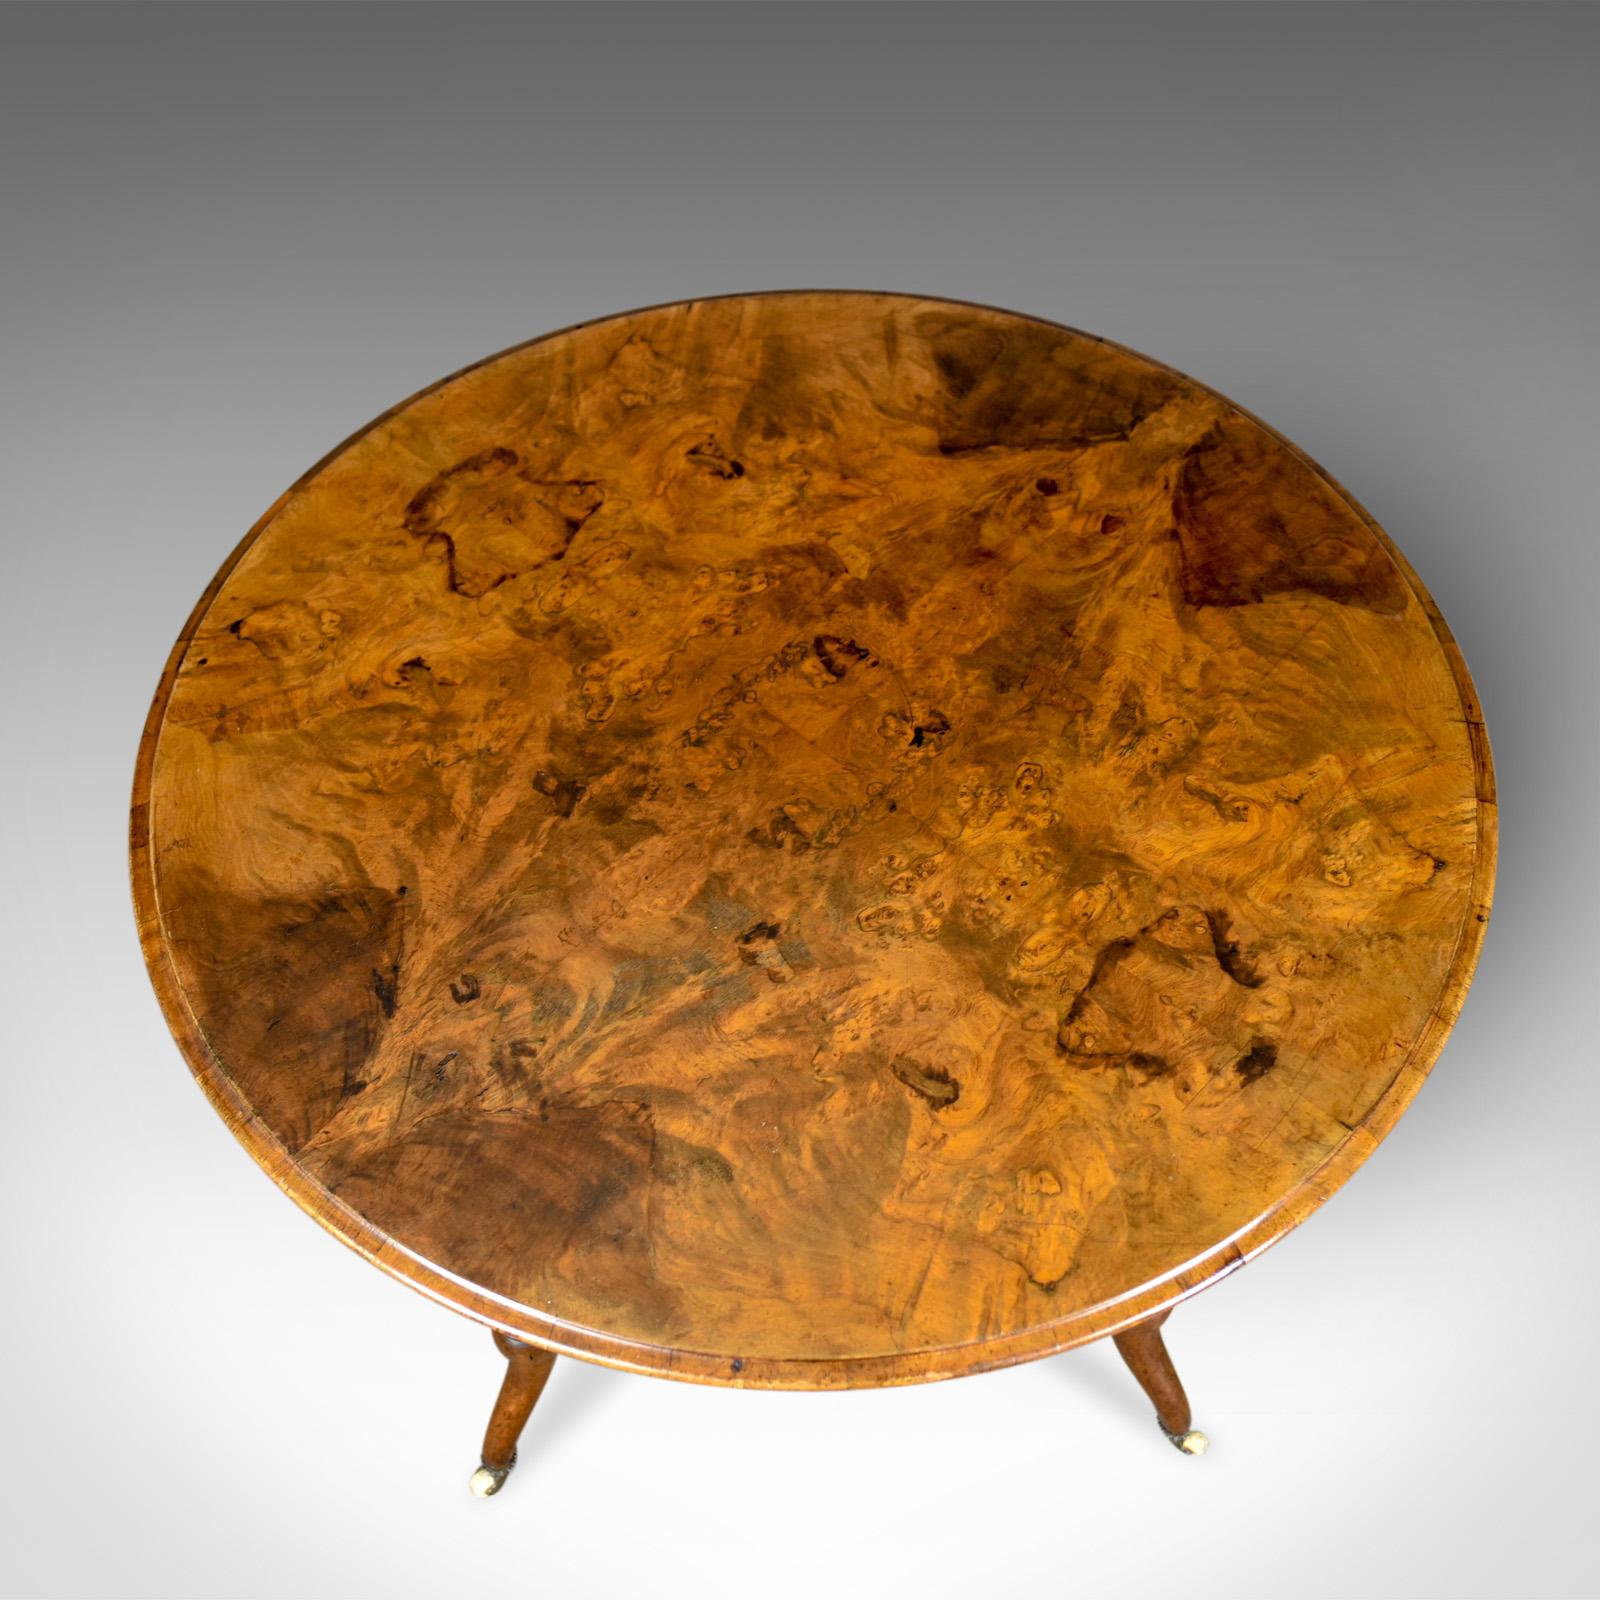 This is a mid-size antique centre table. An English, Victorian, circular, burr walnut tea table dating to the mid-19th century, circa 1870.

Spectacular grain interest in the quarter veneered burr walnut
Desirable aged patina and good consistent